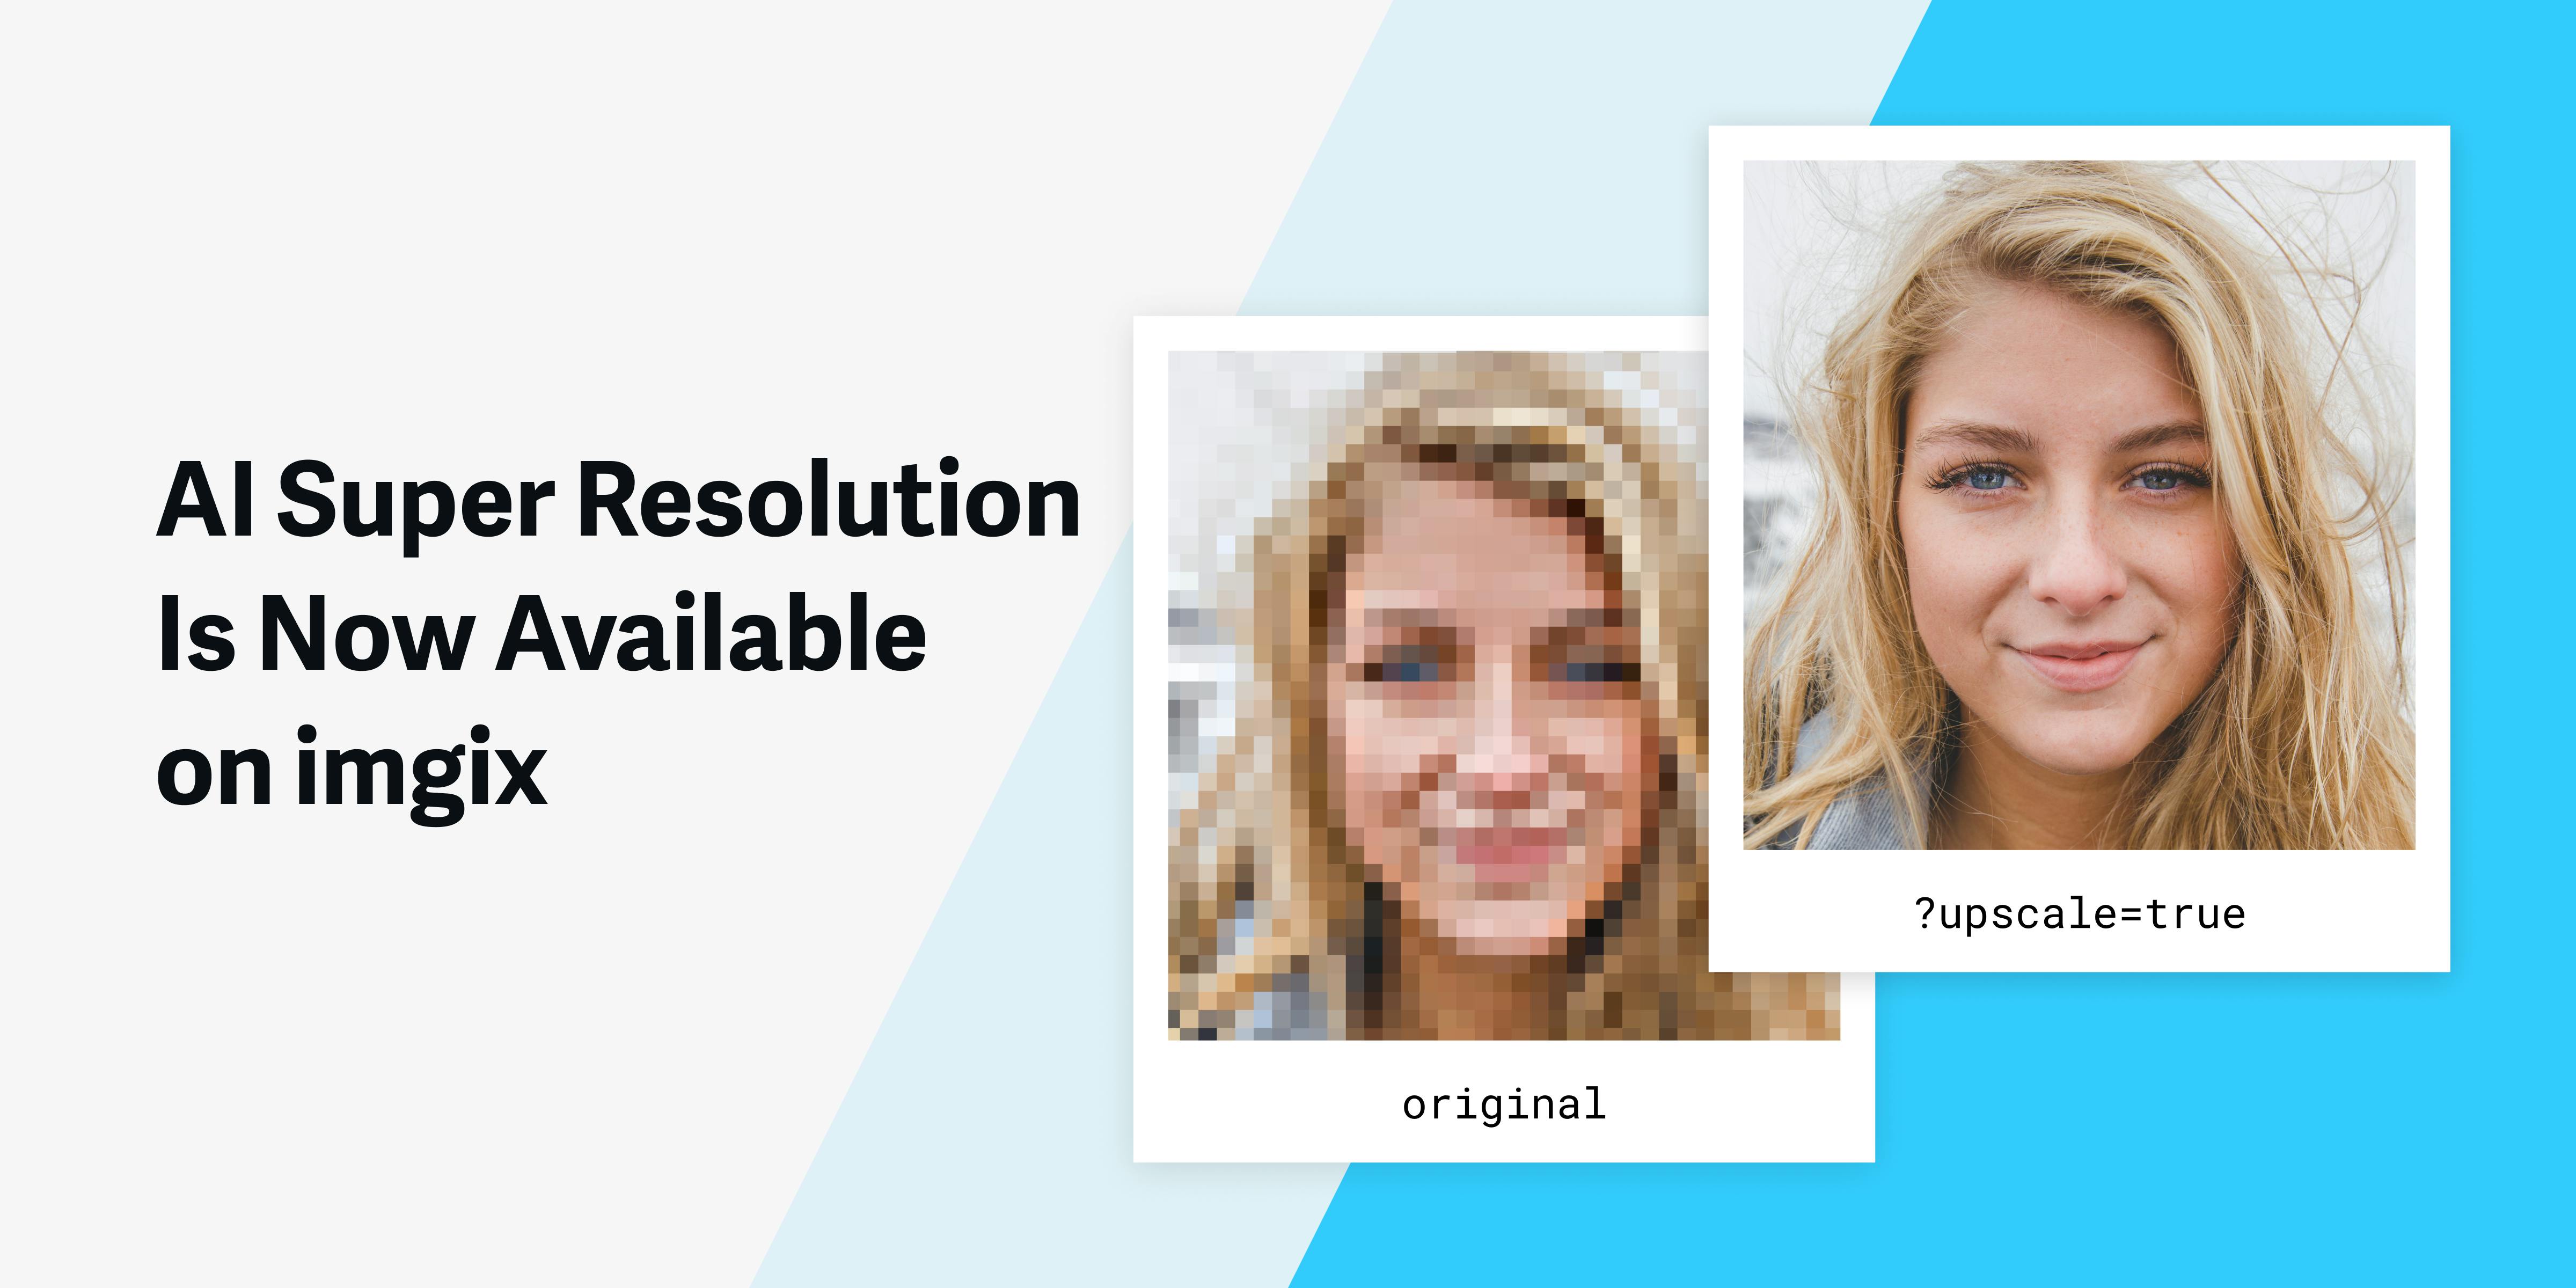 Upscale your images using AI for better visual quality. Revive older photos, enhance user-generated content, and create visual consistency across your site. Combined with our other AI features, you can effortlessly achieve advanced visual effects while saving time.